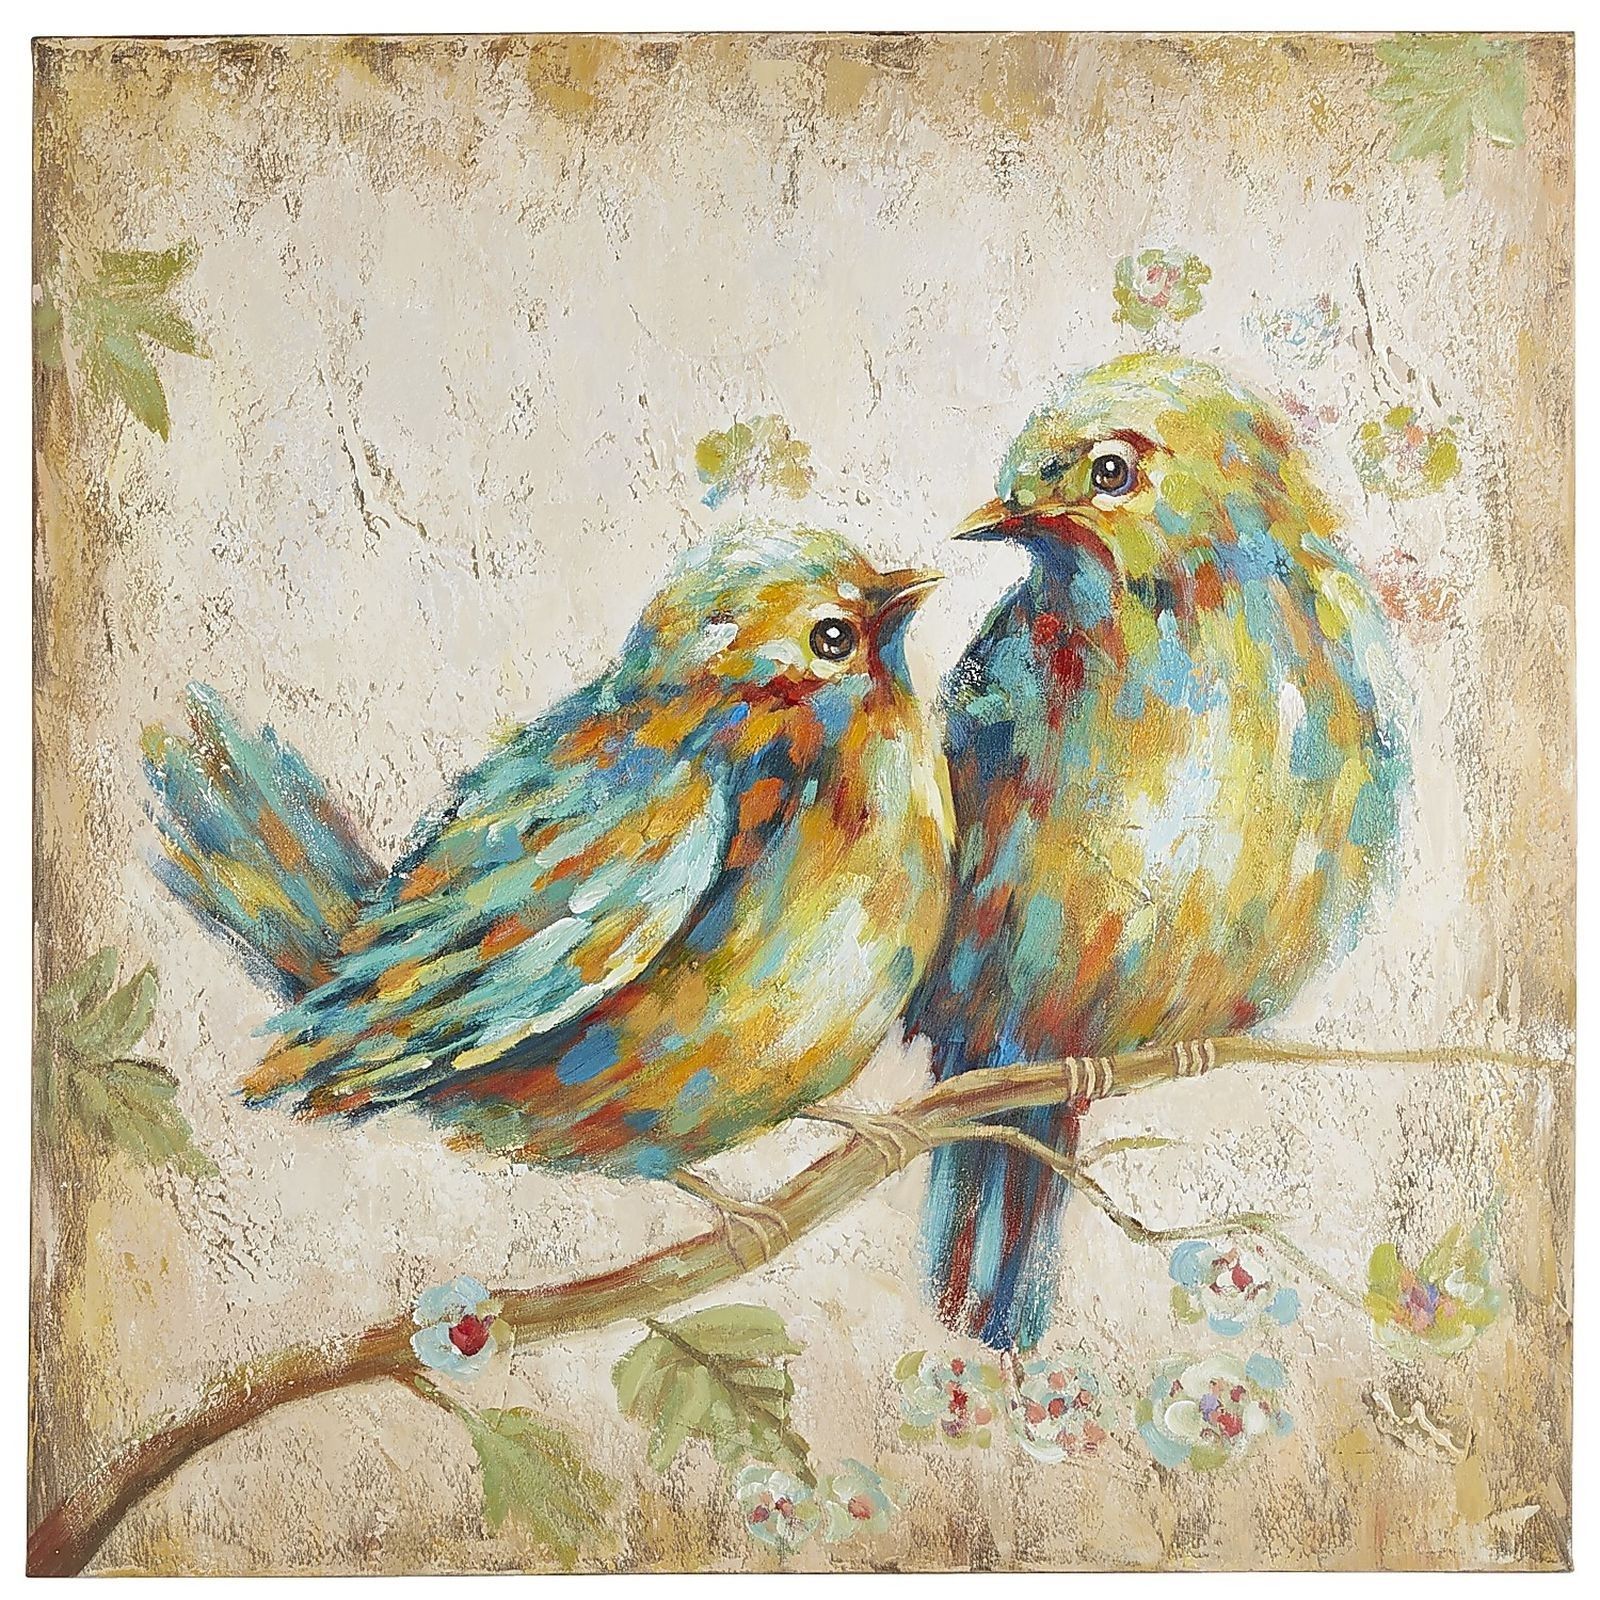 Fantastic Pier 1 Imports Wall Art Adornment Wall Painting Ideas For Most Recent Pier 1 Wall Art (View 16 of 20)